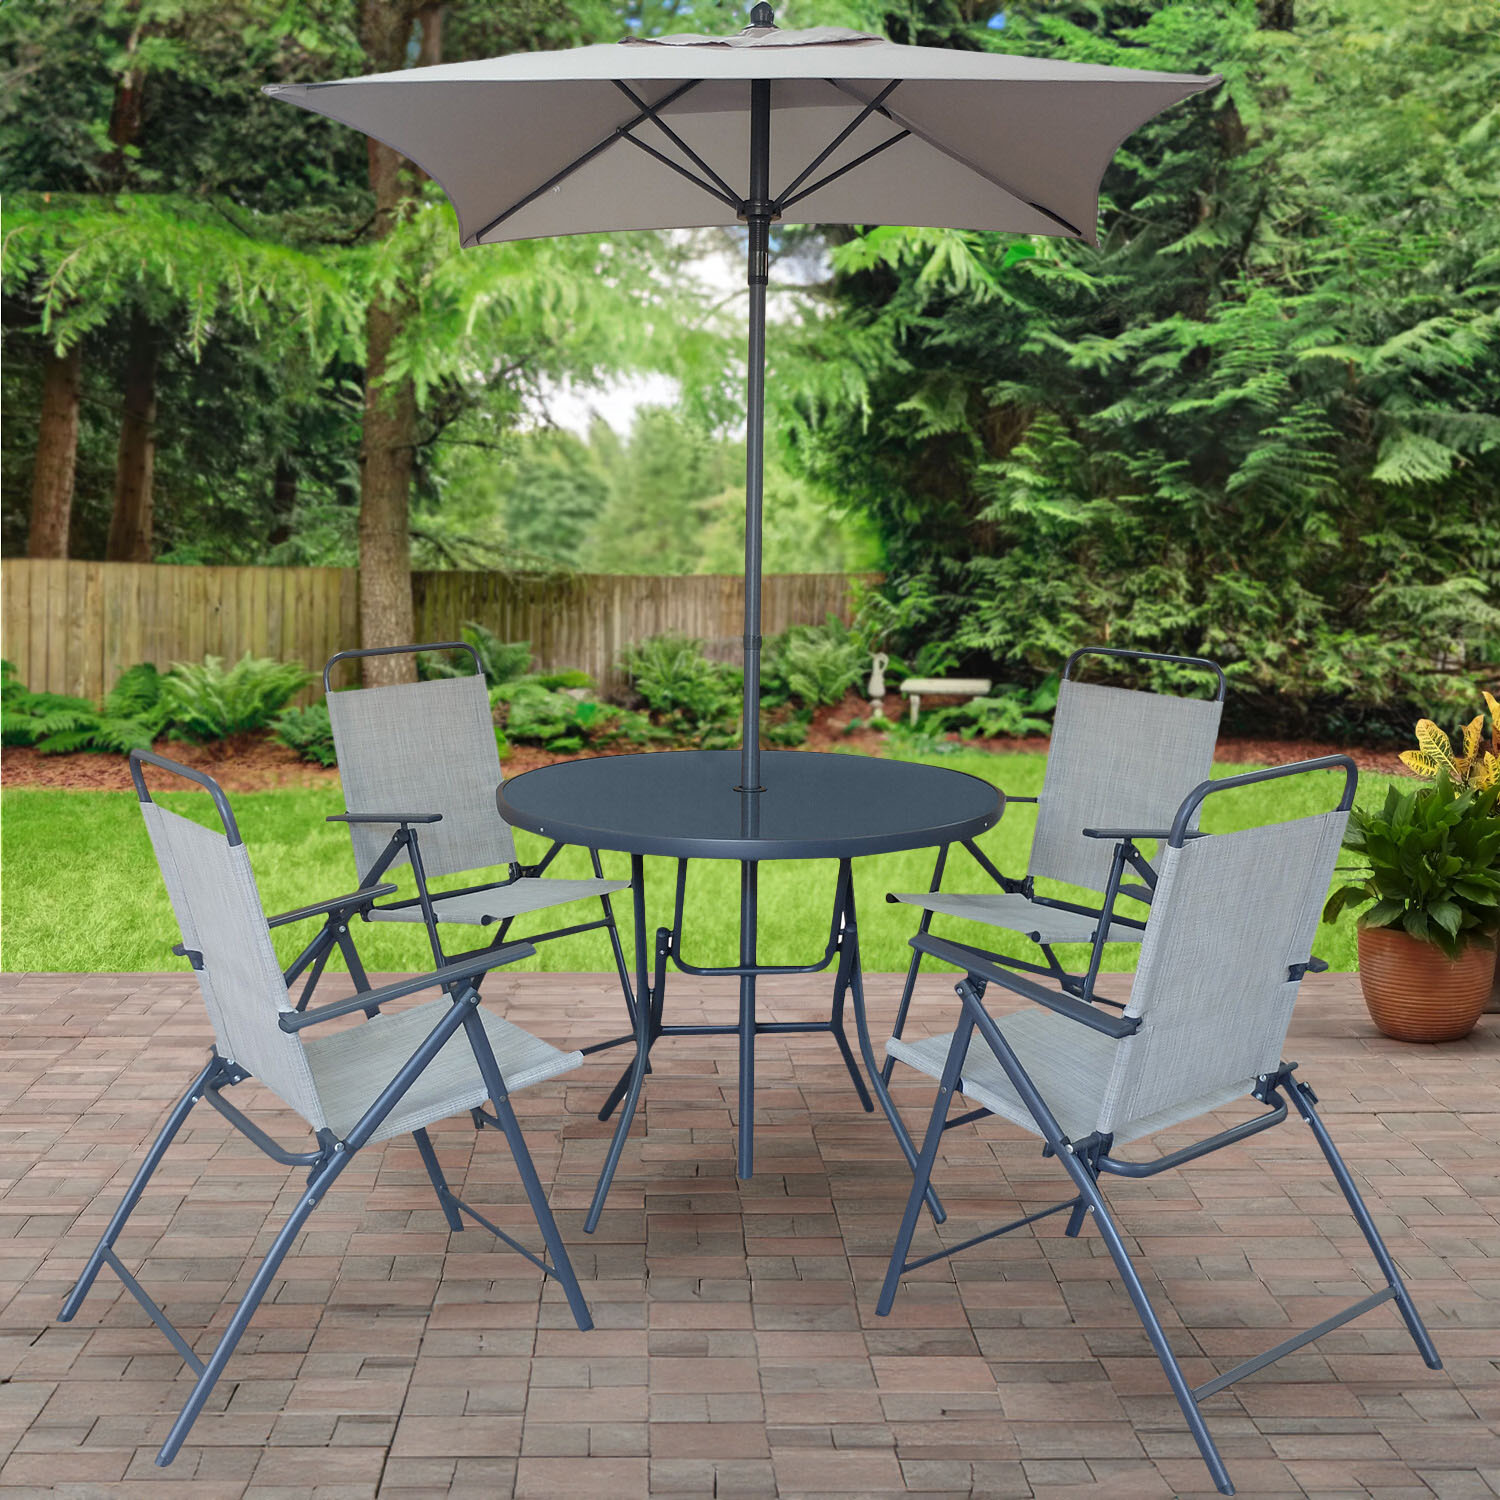 Malay Outdoor Essentials Safina 4 Seater Foldable Patio Dining Set Sage Image 1